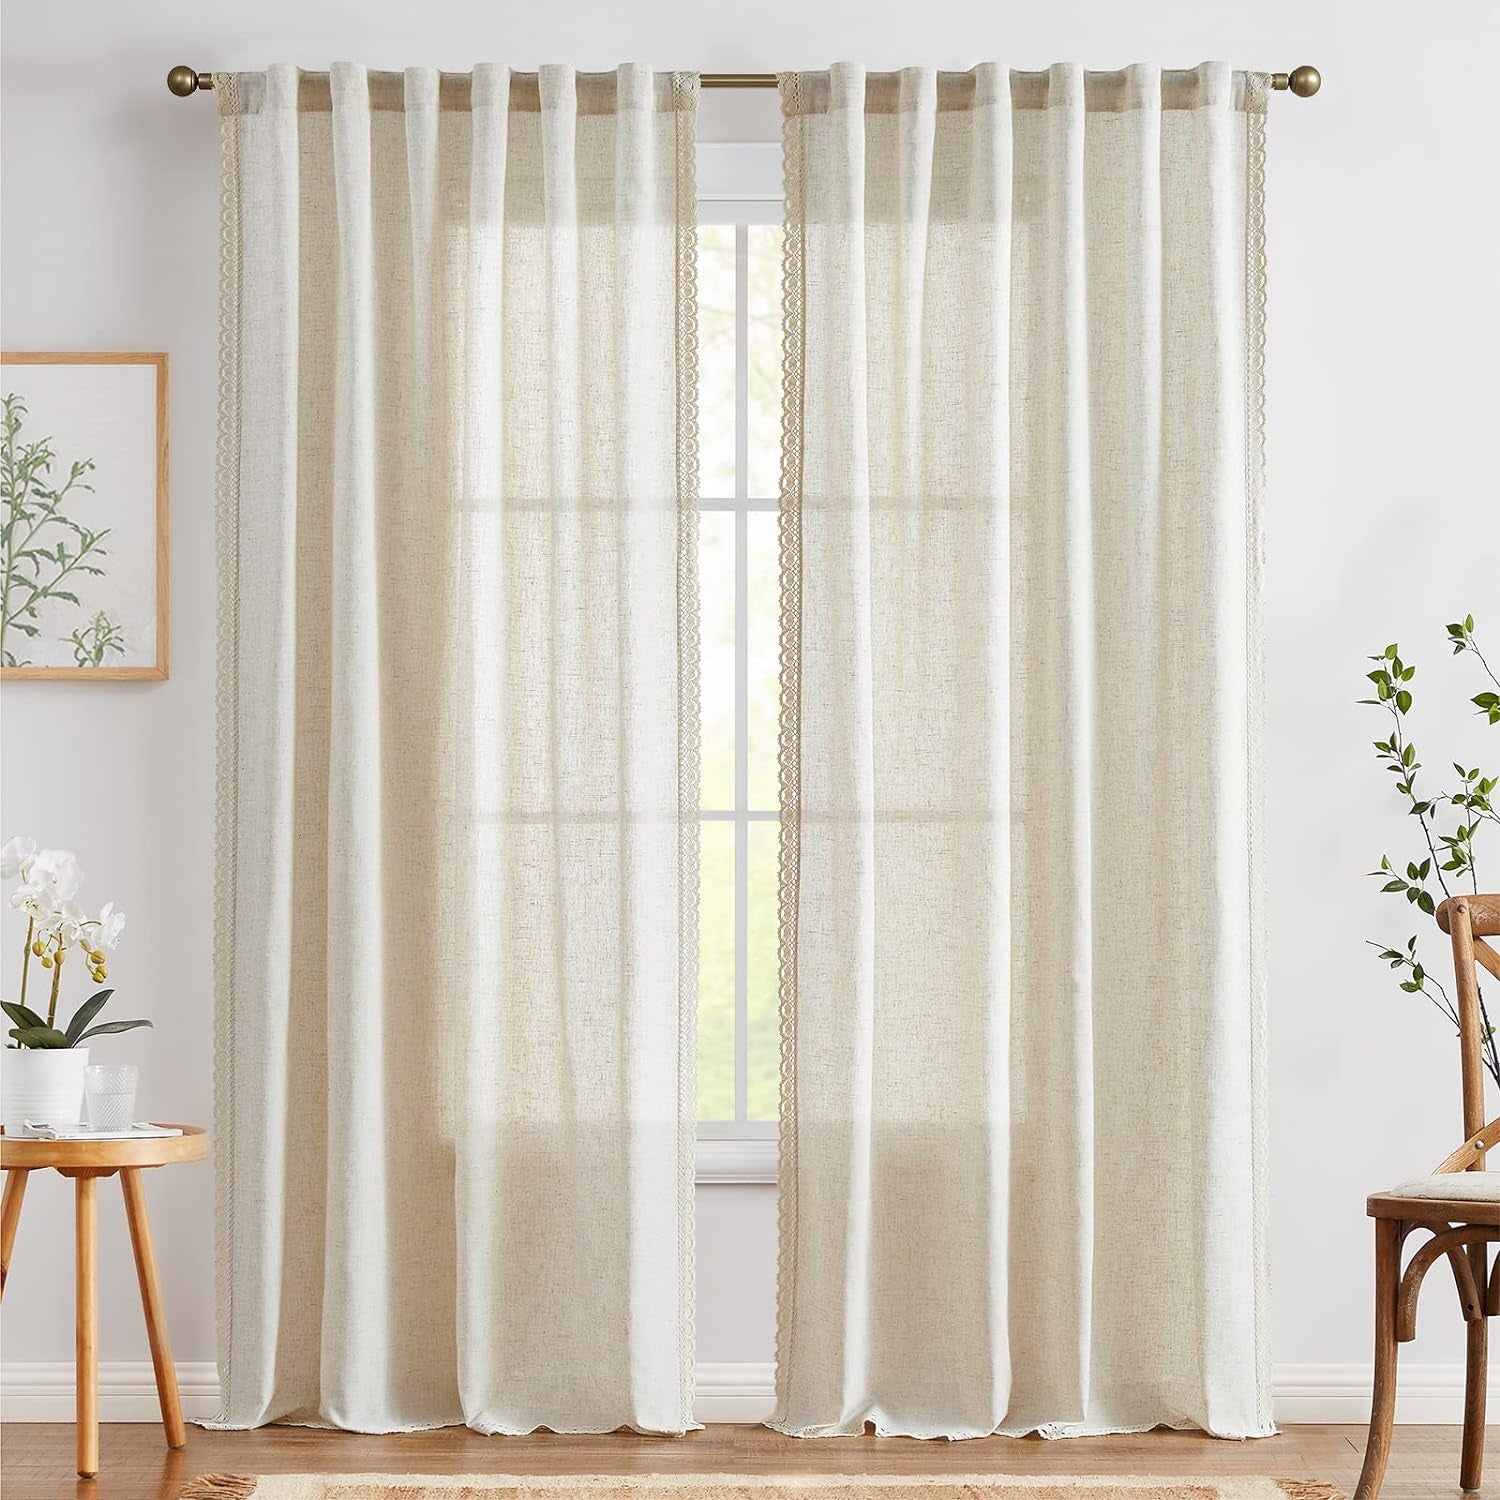 Lazzzy Christmas Linen Semi Sheer Curtains for Living Room Decor for Bedroom Thermal Insulated Curtain for Winter Cream Beige Boho Curtains Rod Pocket Window Treatments Drapes, 63 Inch Long,2 Panels  TOPICK Laced Ecru W50 X L84 